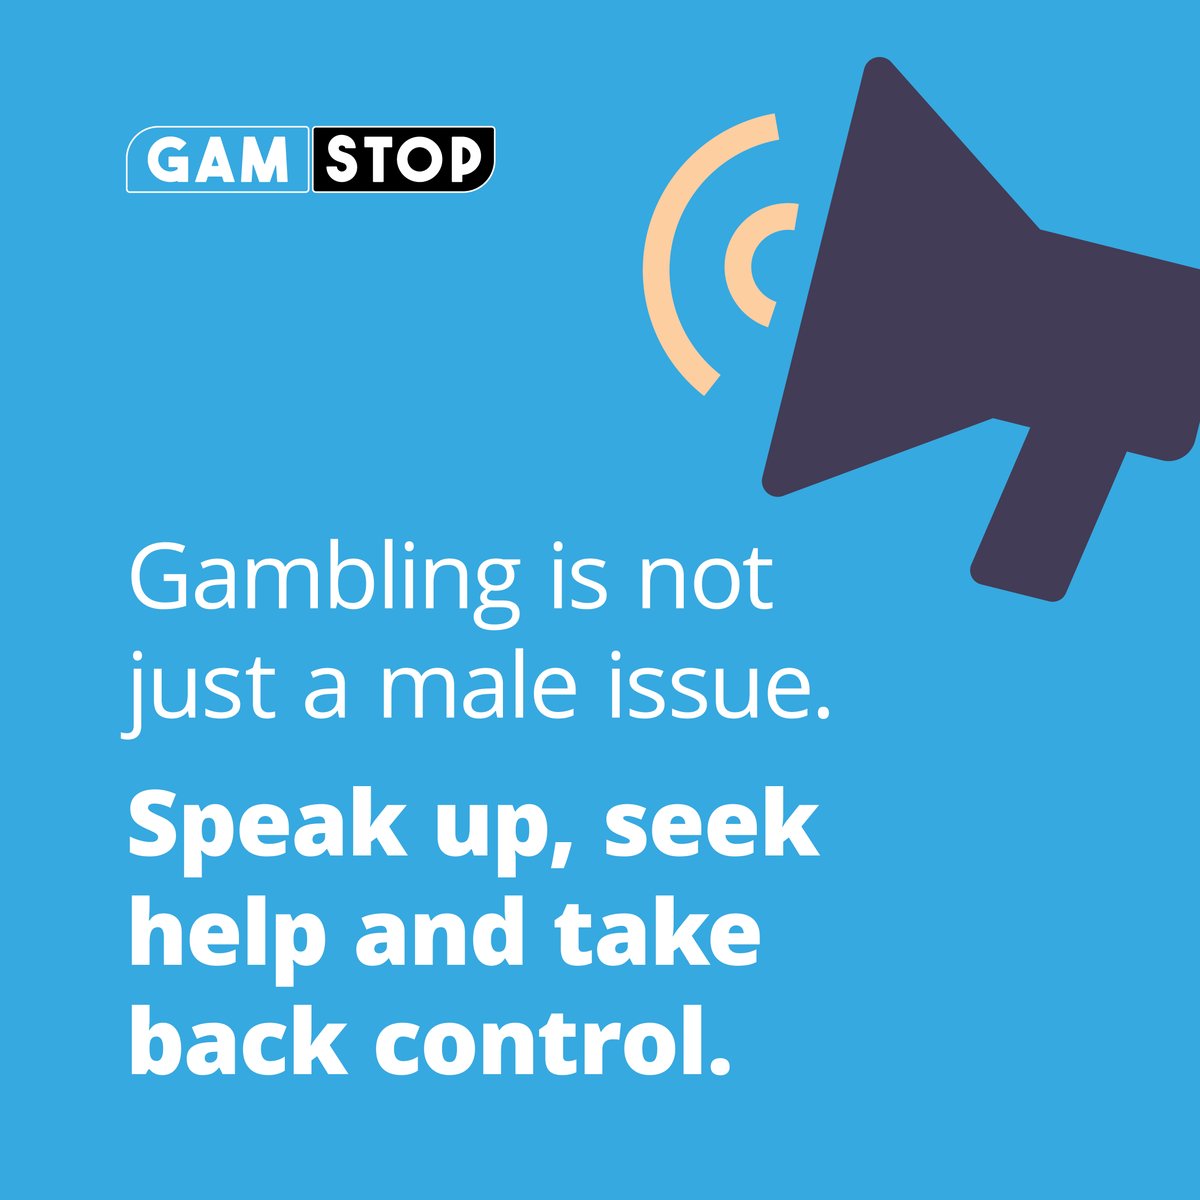 Anyone can struggle with gambling. 

Over 110,000 women have registered with GAMSTOP.

Many organisations also have programs for female gamblers, such as New Beginnings with @Betknowmore 

Call the National Gambling Helpline on  0808 8020 133 for free, advice and support.